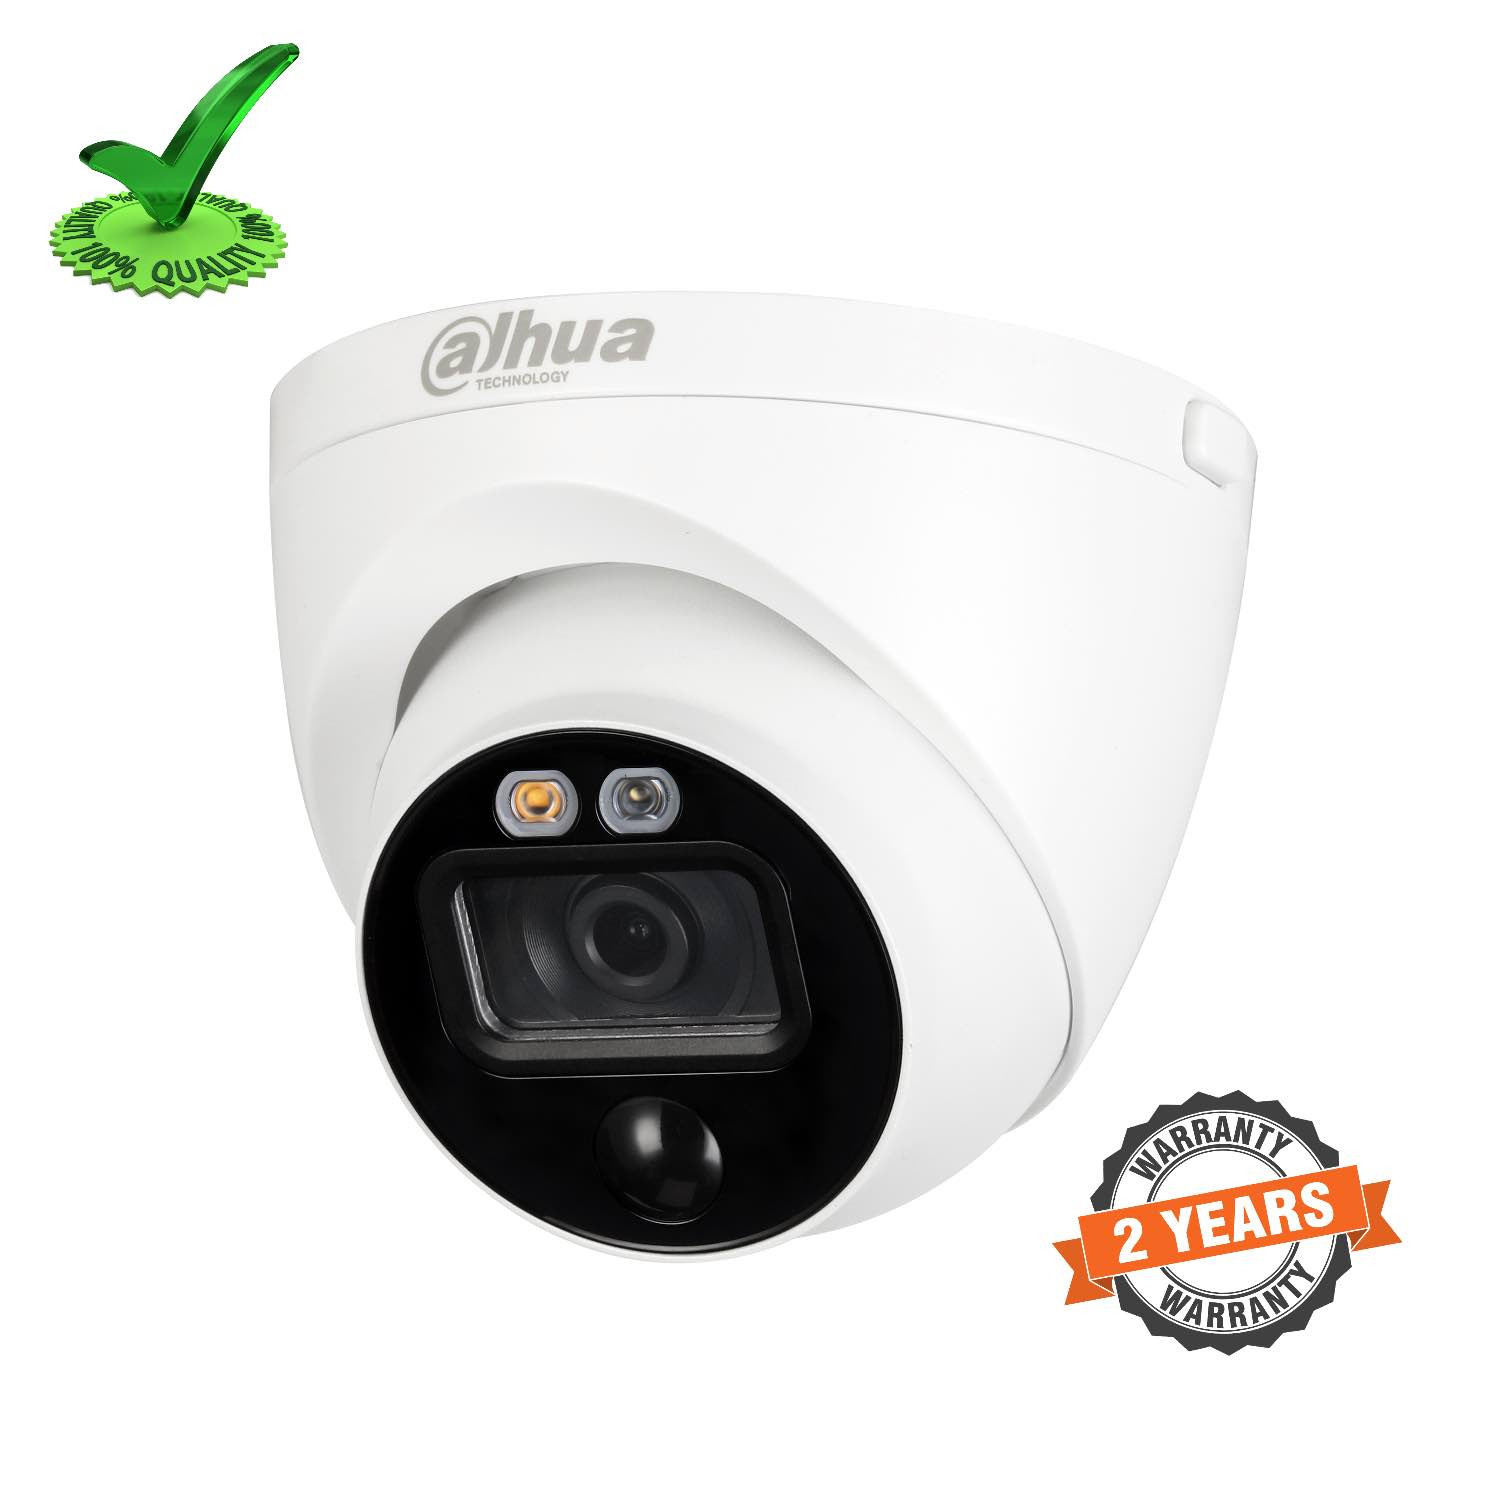 Dahua DH-HAC-ME1500EP-LED 5MP CCTV Active Deterrence Camera